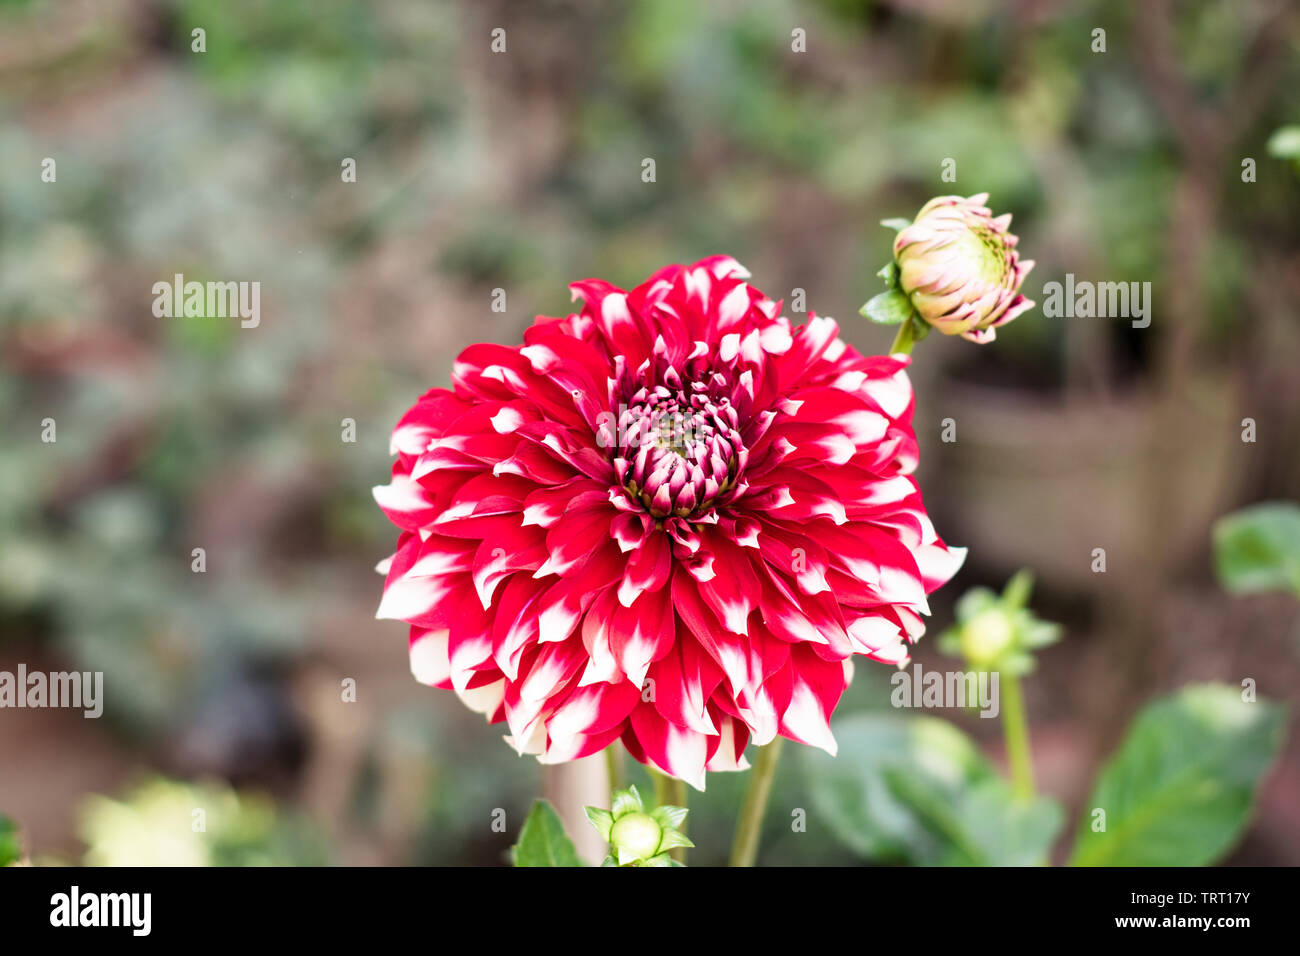 A pink white pincushion flower (Scabiosa columbaria) Related to species of sunflower, daisy, chrysanthemum, and zinnia. It is also called Pink Mist, a Stock Photo